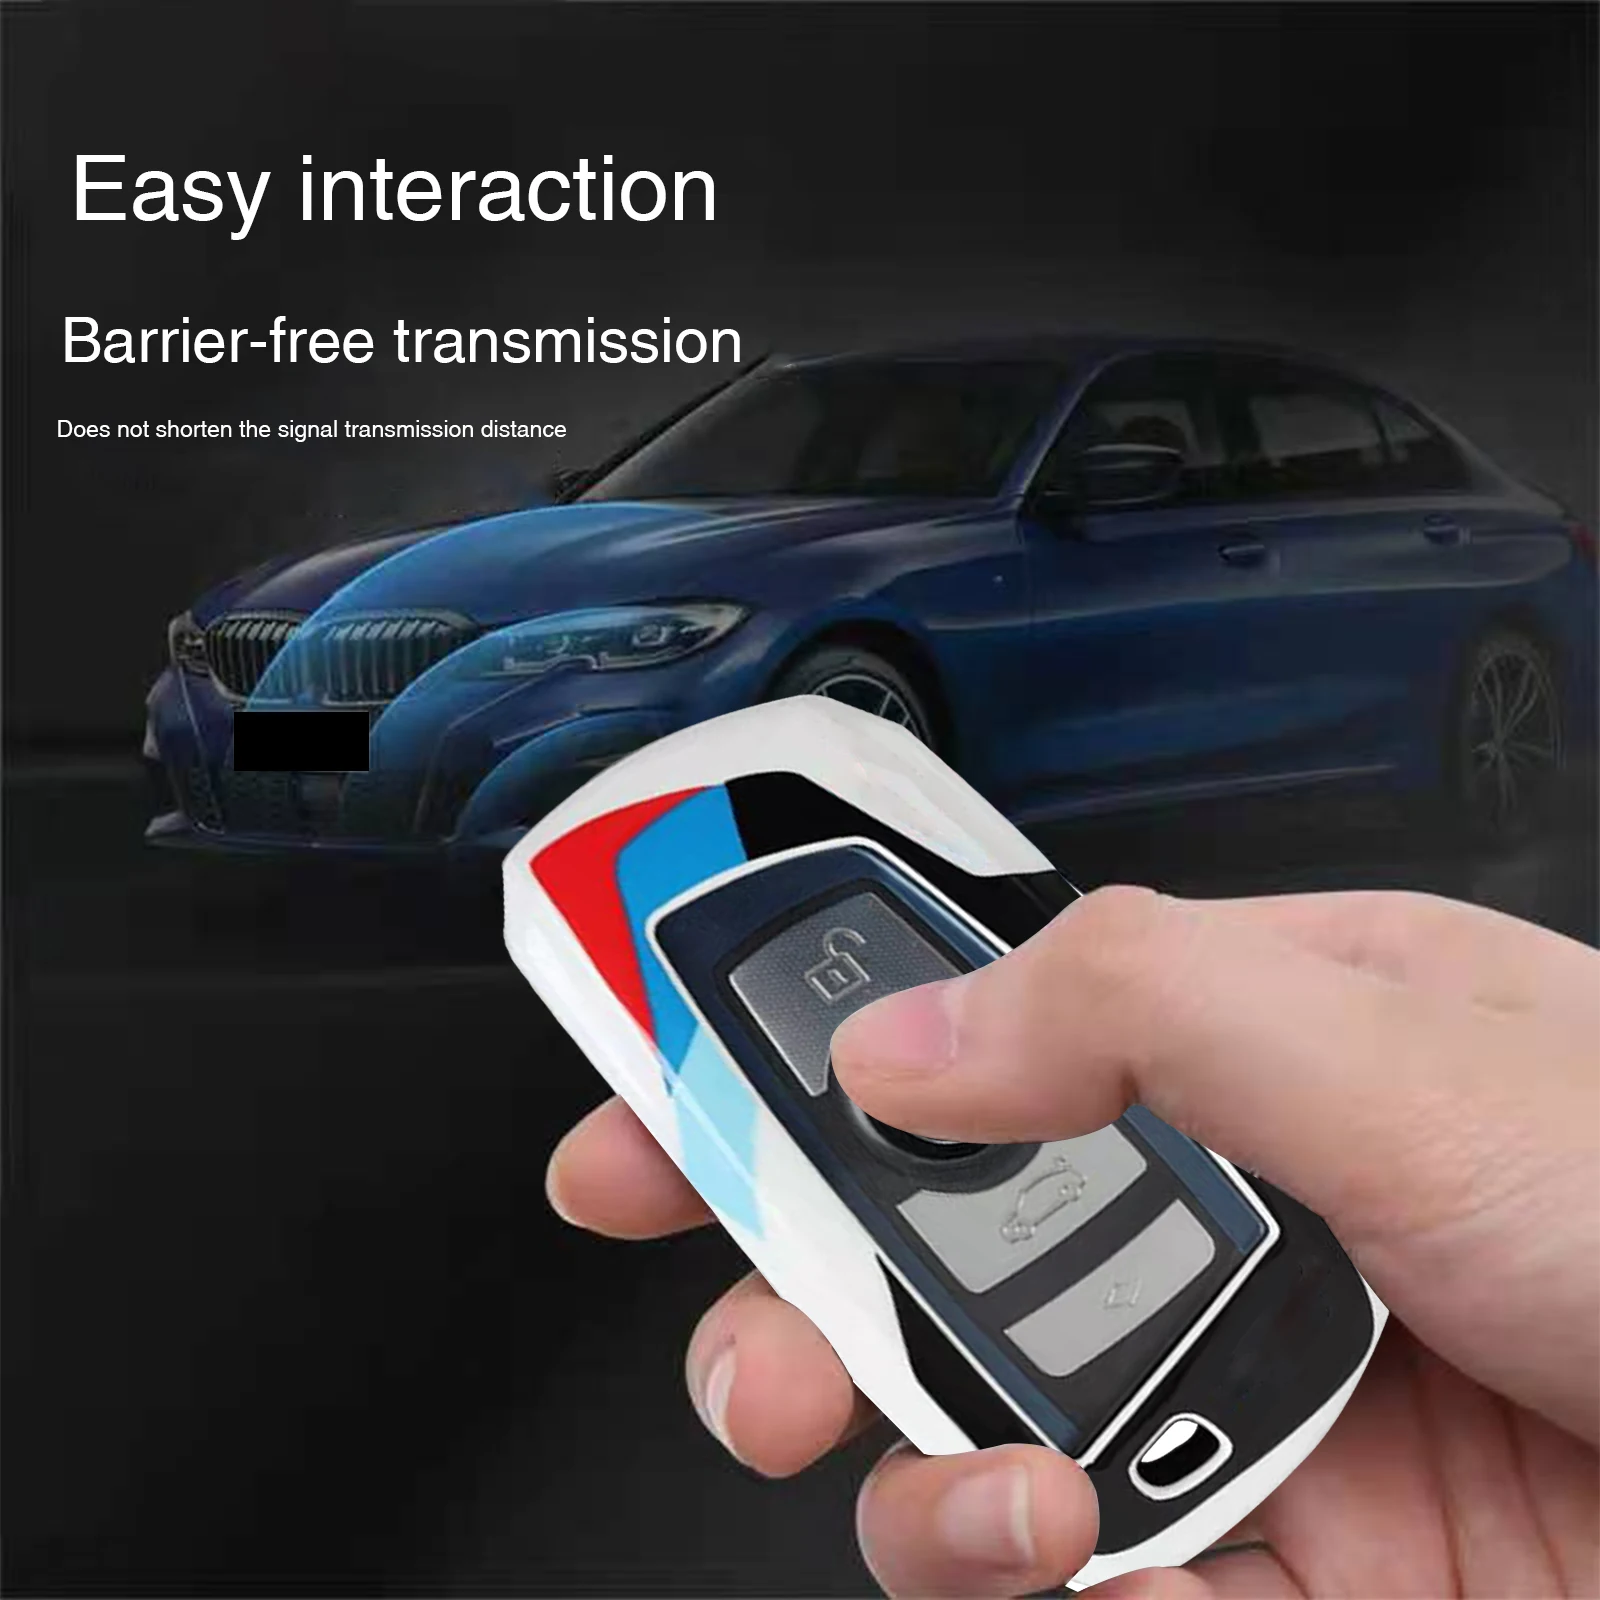 

New Smart magnetic type Key Fob Case Cover shell For BMW F10 F12 F20 F25 F26 F20 F32 F01 F02 M2 M3 M4 M5 M6 3 5 7 X3 X4 series